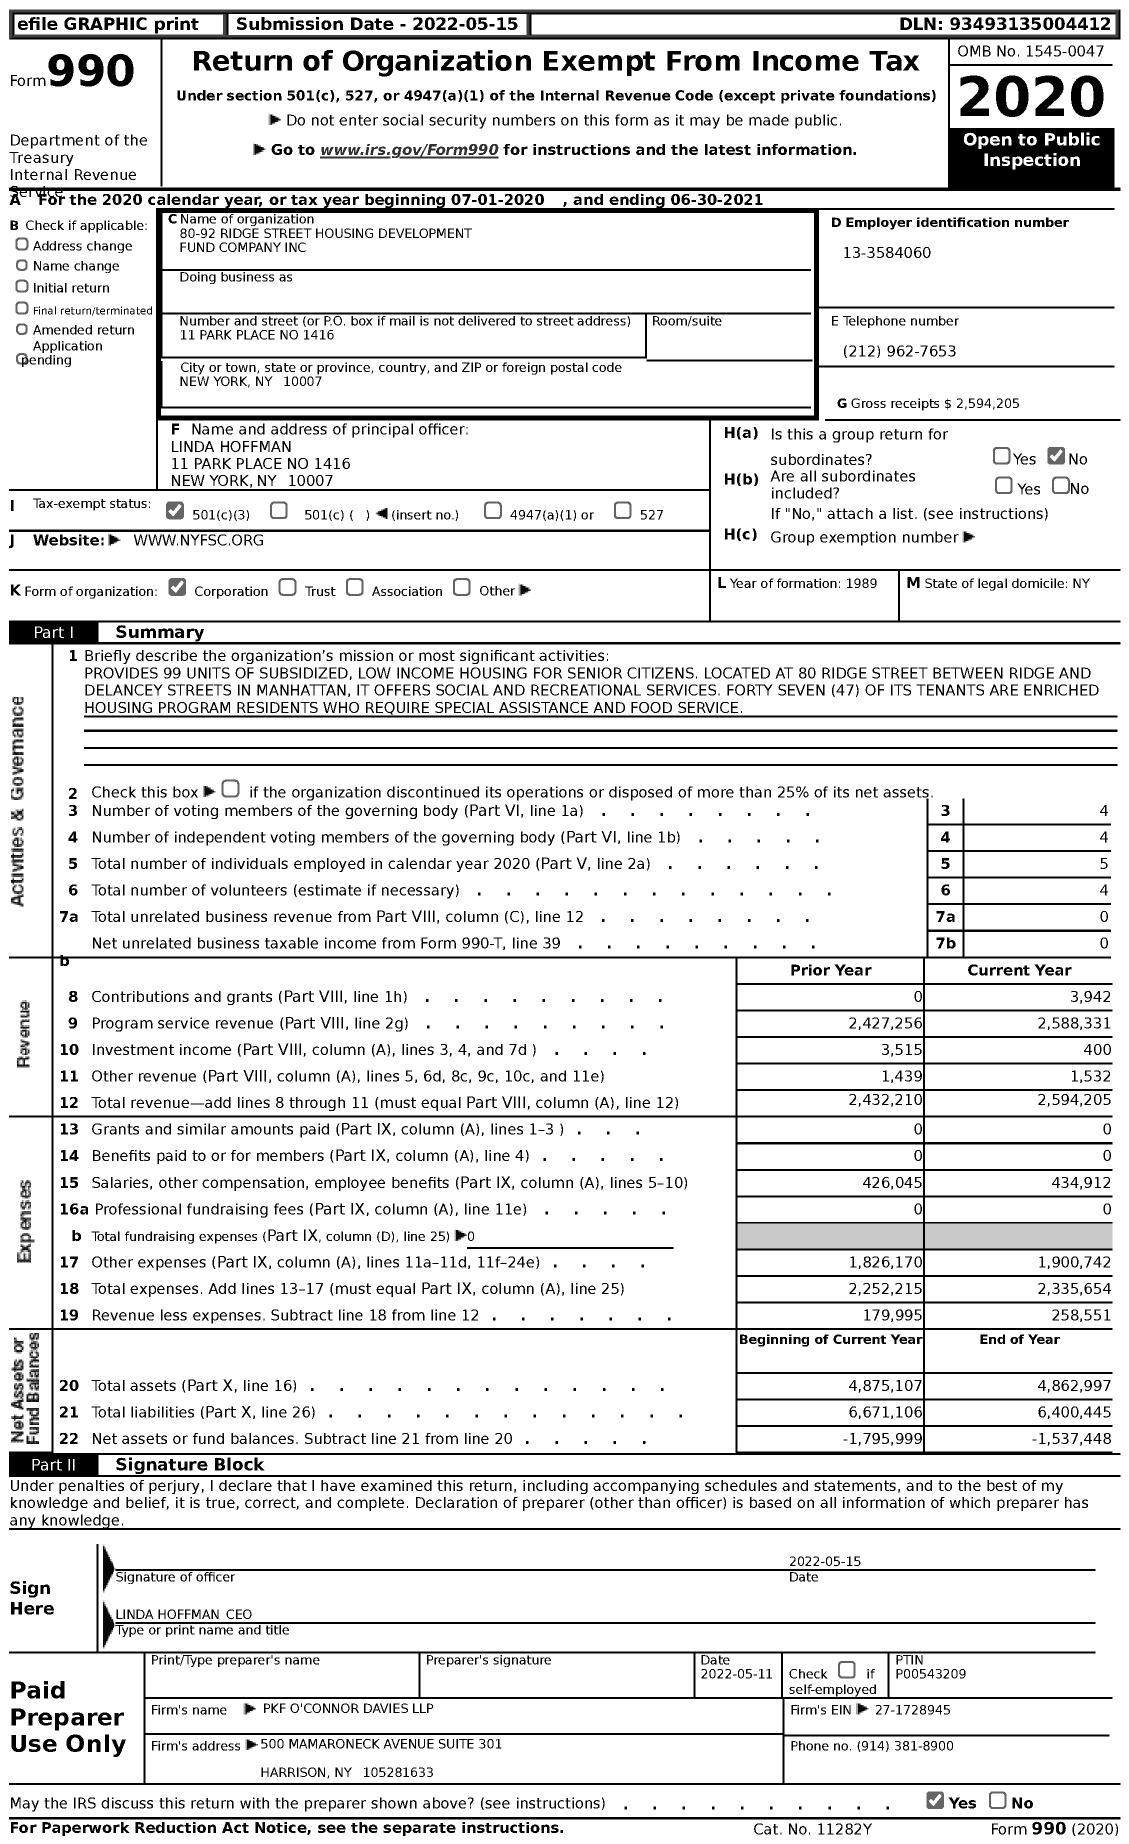 Image of first page of 2020 Form 990 for 80-92 Ridge Street Housing Development Fund Company